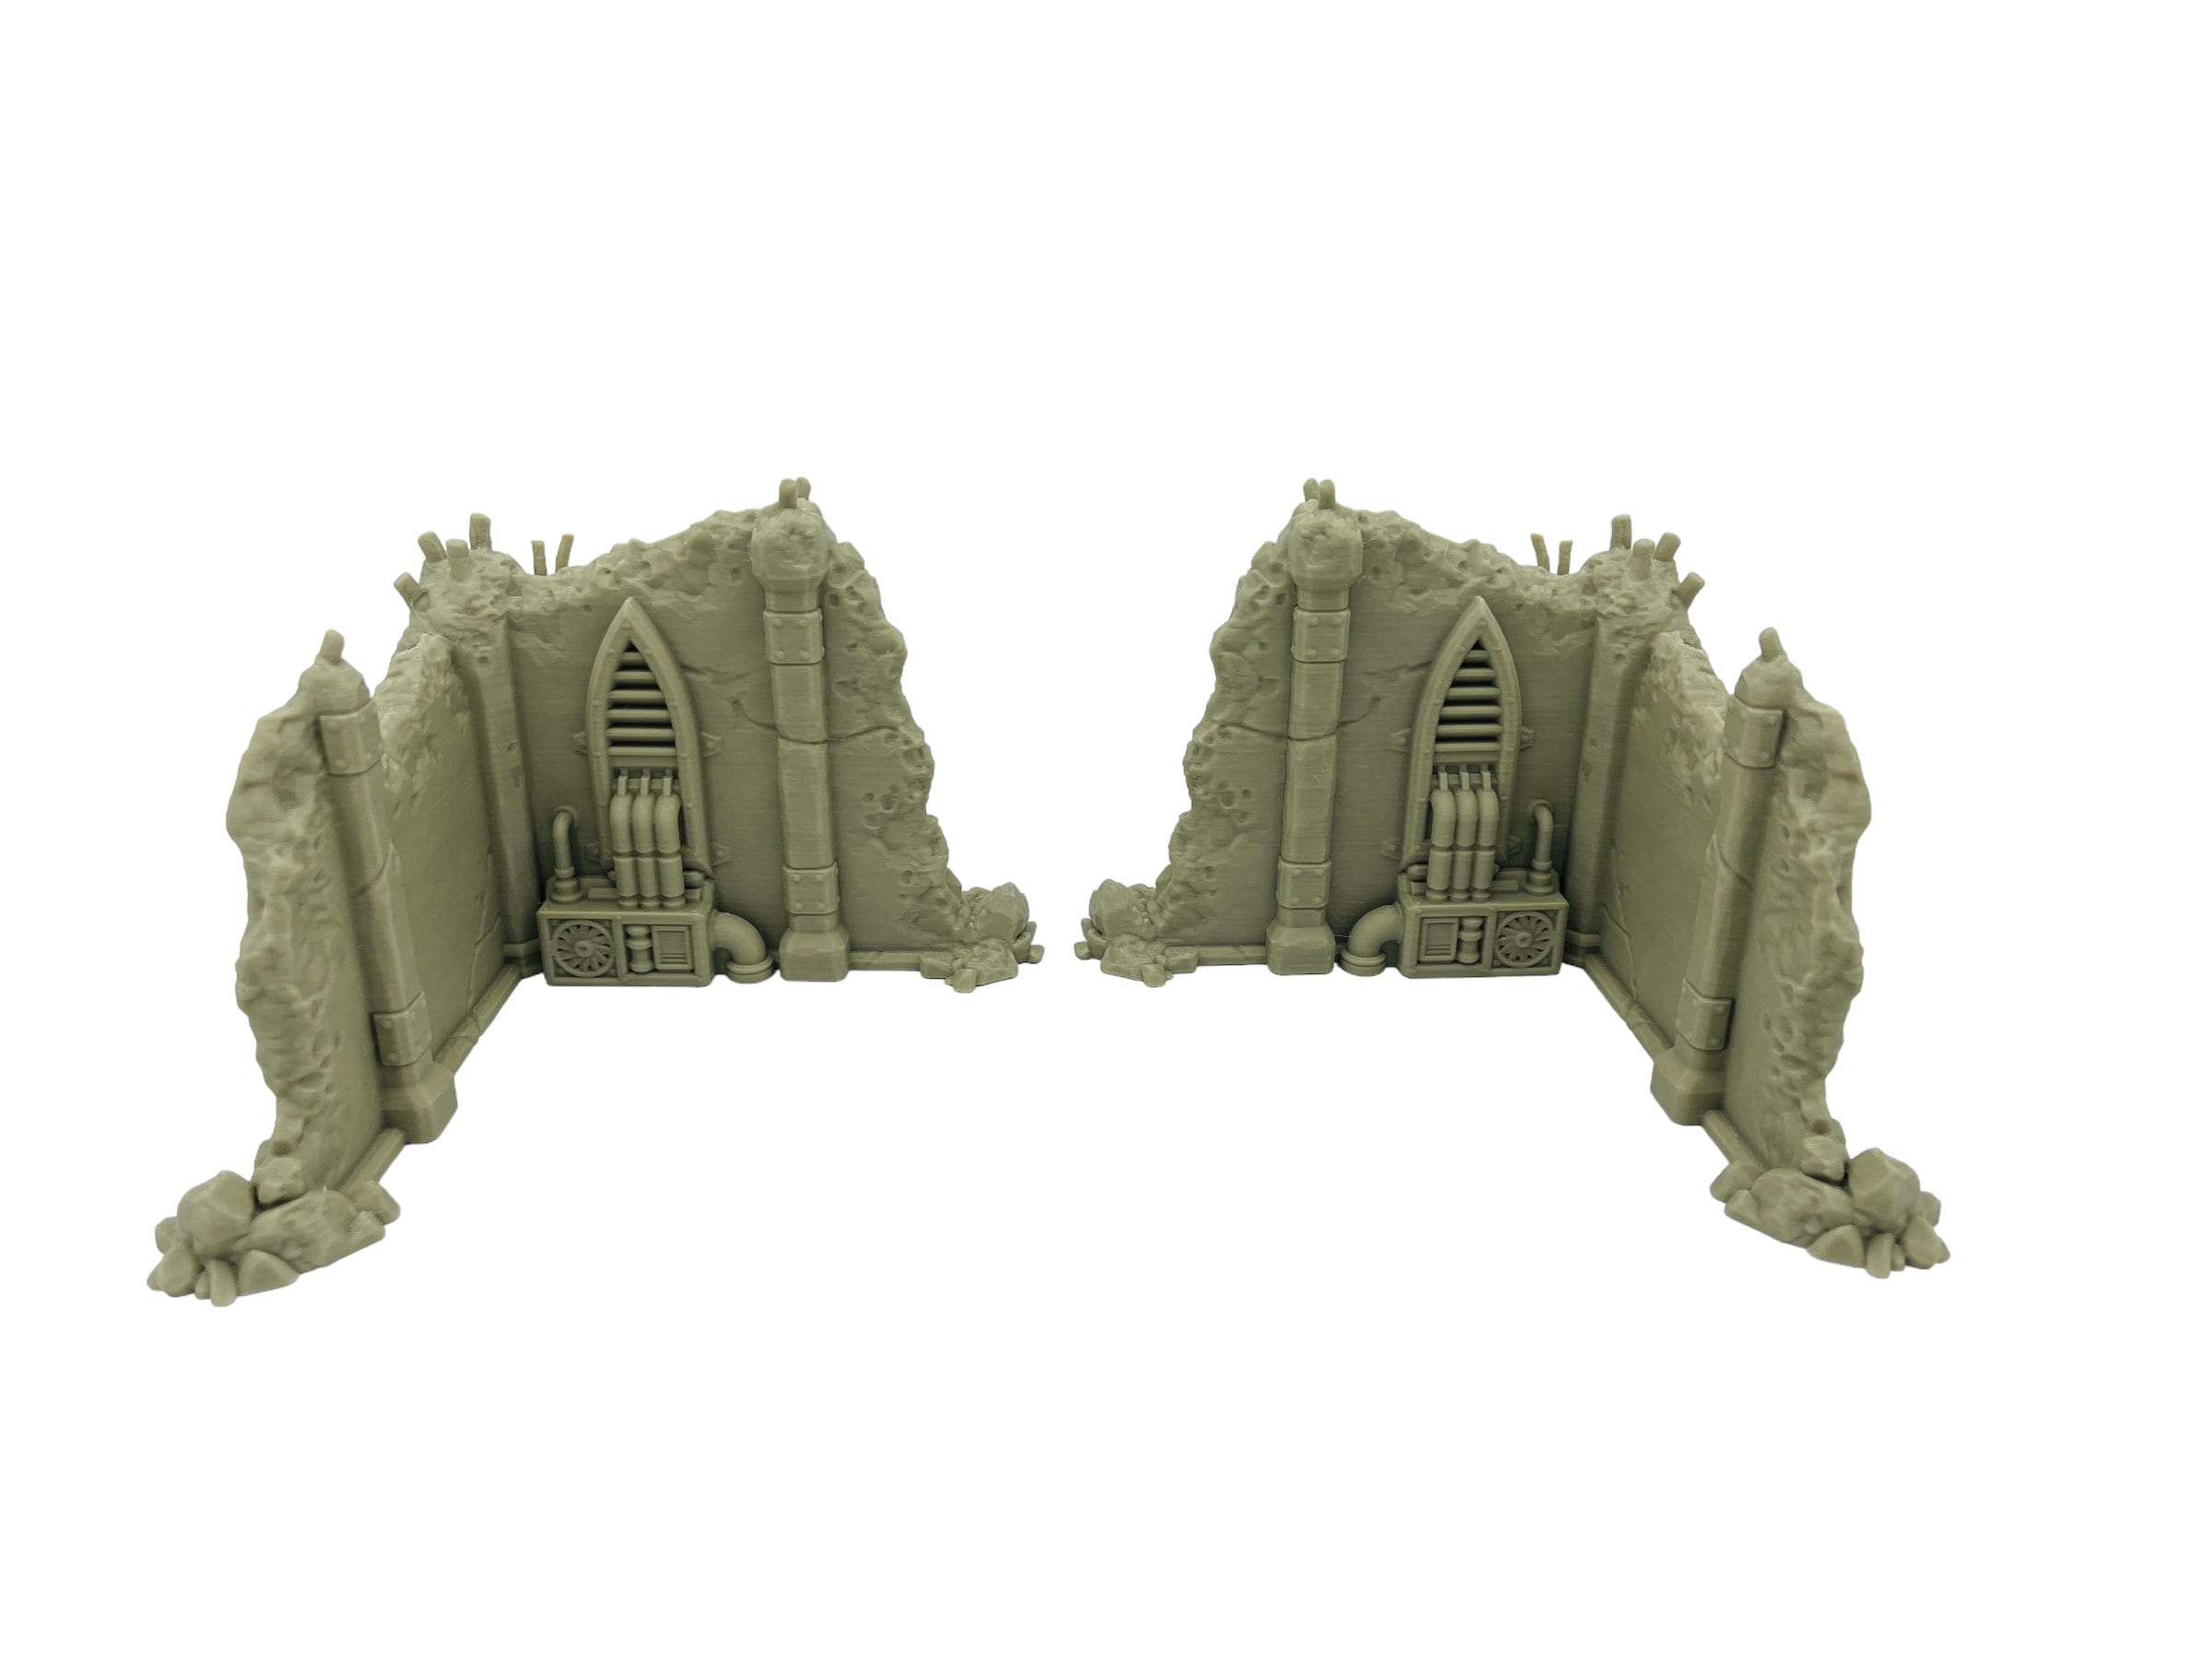 Ruined Ground Scatter Corner Pieces - Ruins of the Empire / Forbidden Prints / RPG and Wargame 3d Printed Terrain / Licensed Printer